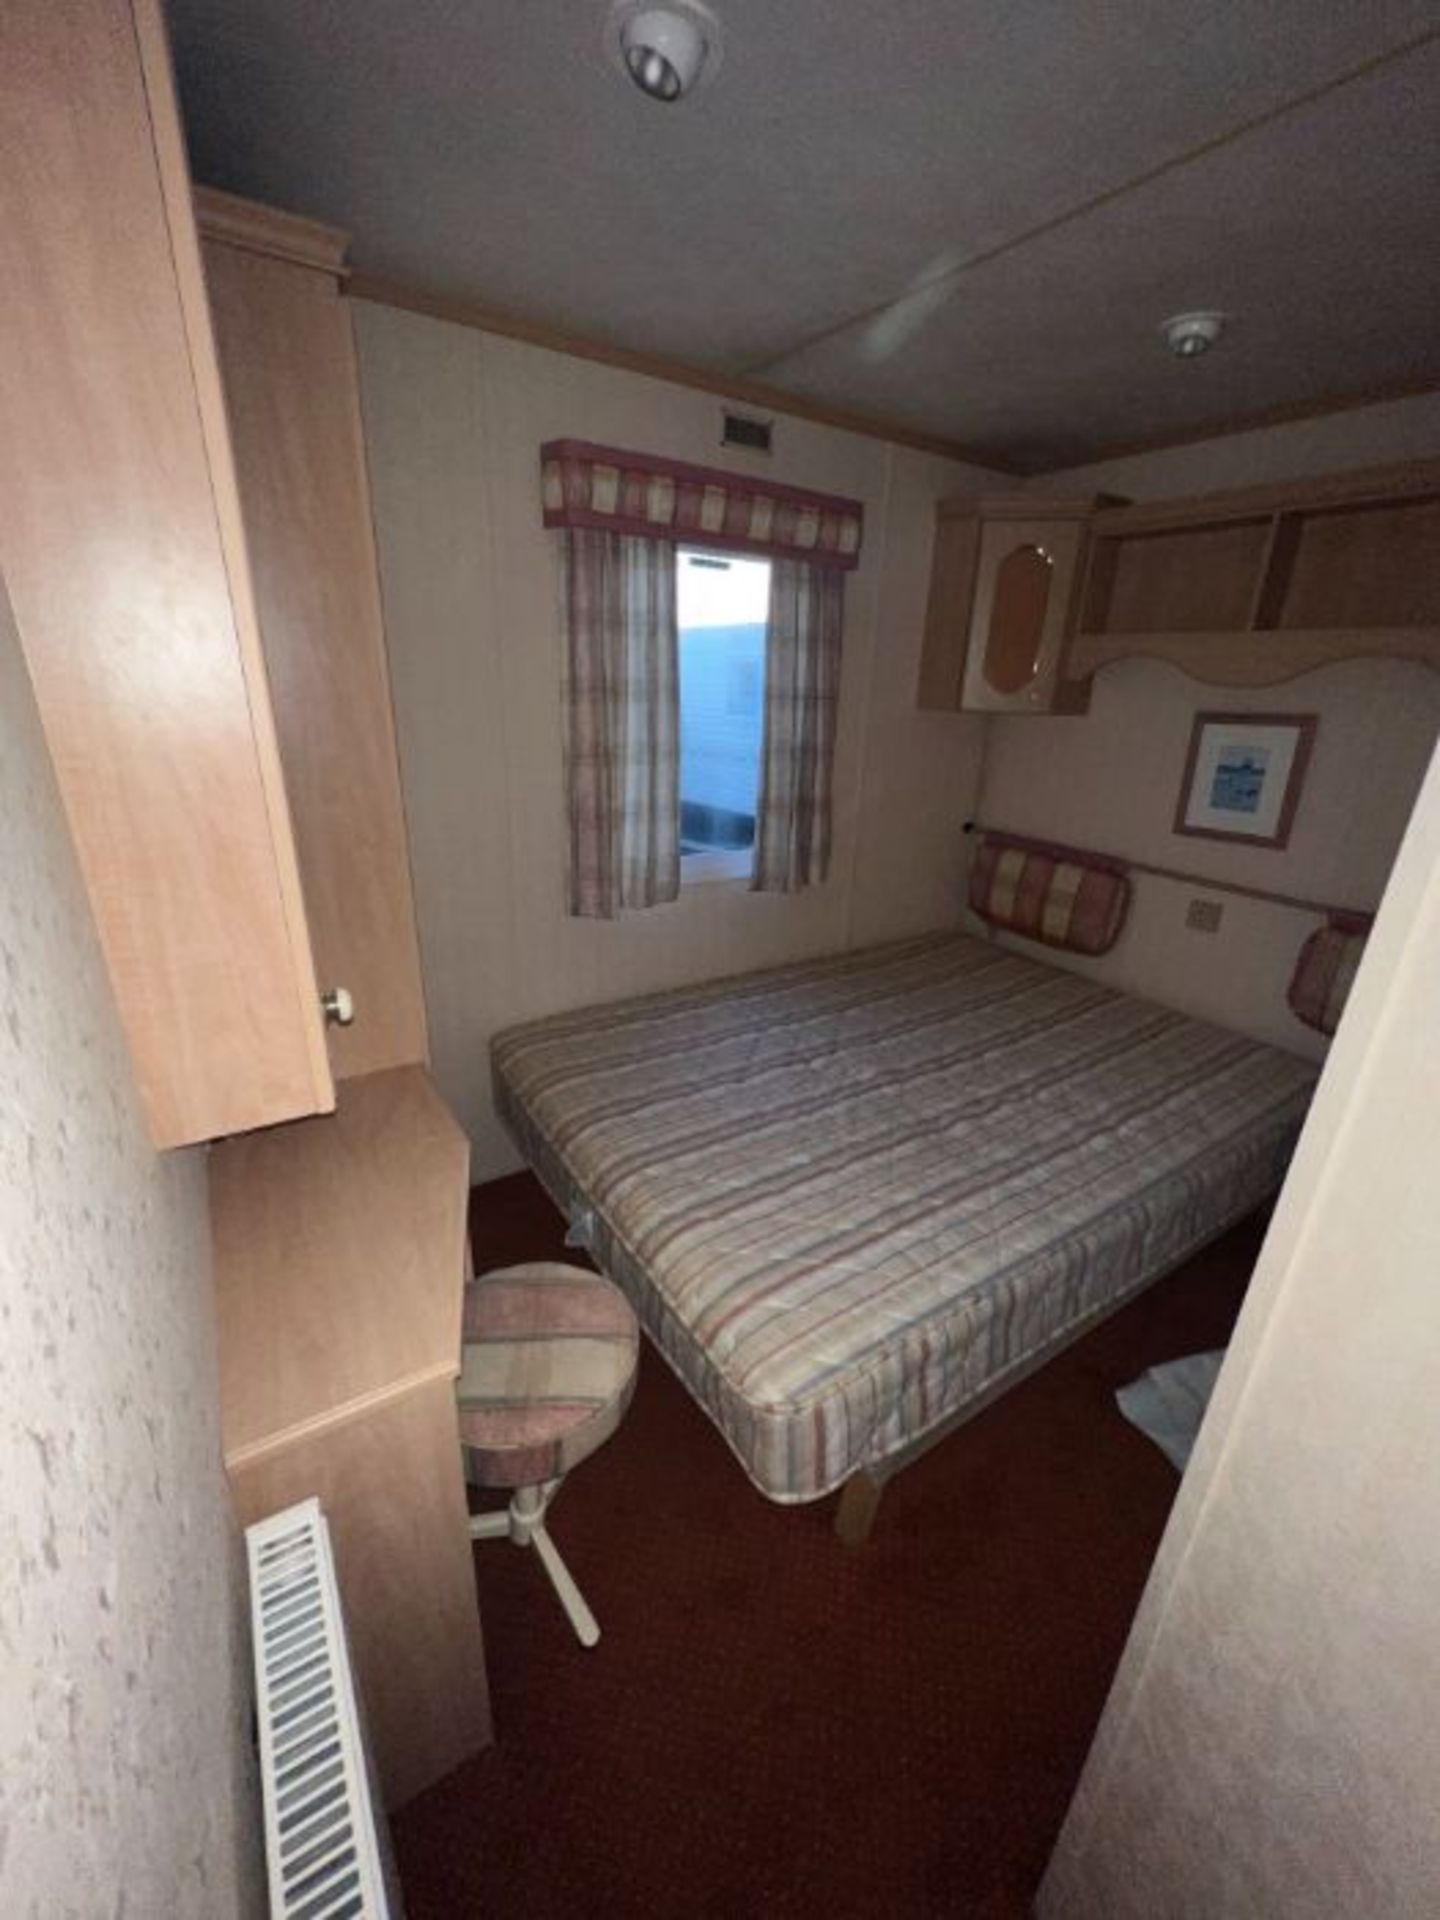 WILLERBY LYNDHURST 37FT X 12FT, 3 BEDROOM STATIC CARAVAN DOUBLE GLAZED & CENTRAL HEATING - LOCATED - Image 8 of 44